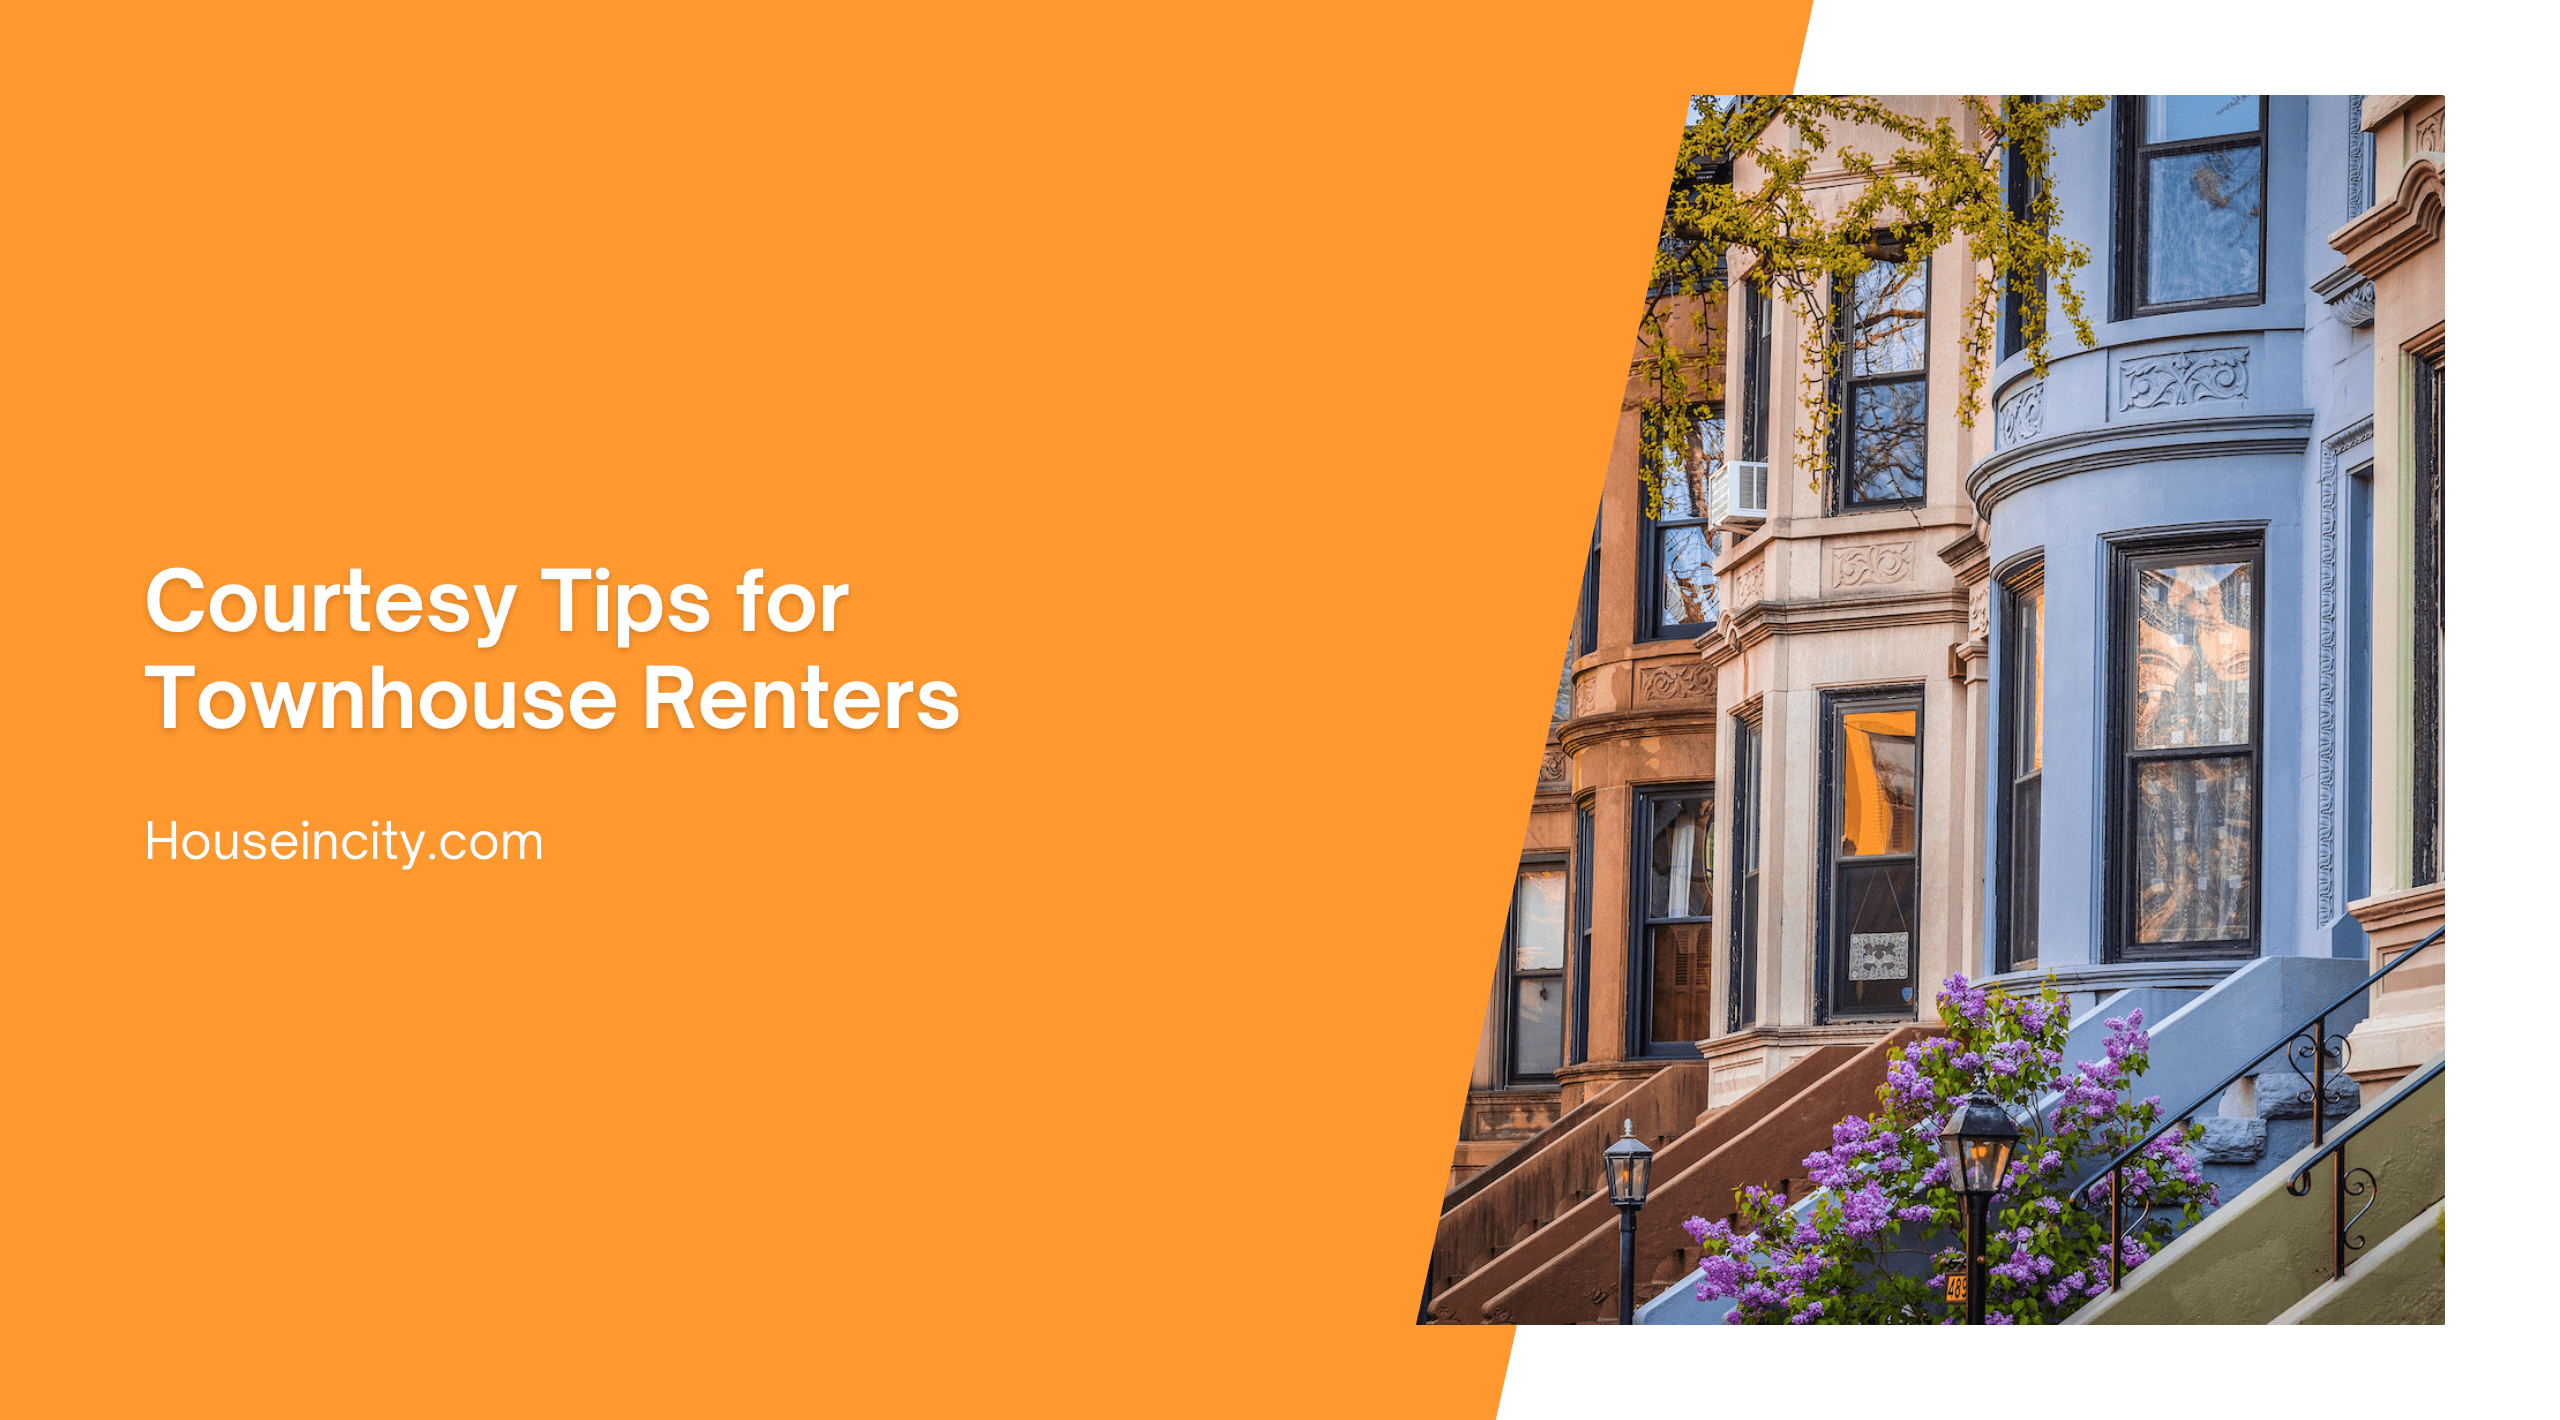 Courtesy Tips for Townhouse Renters